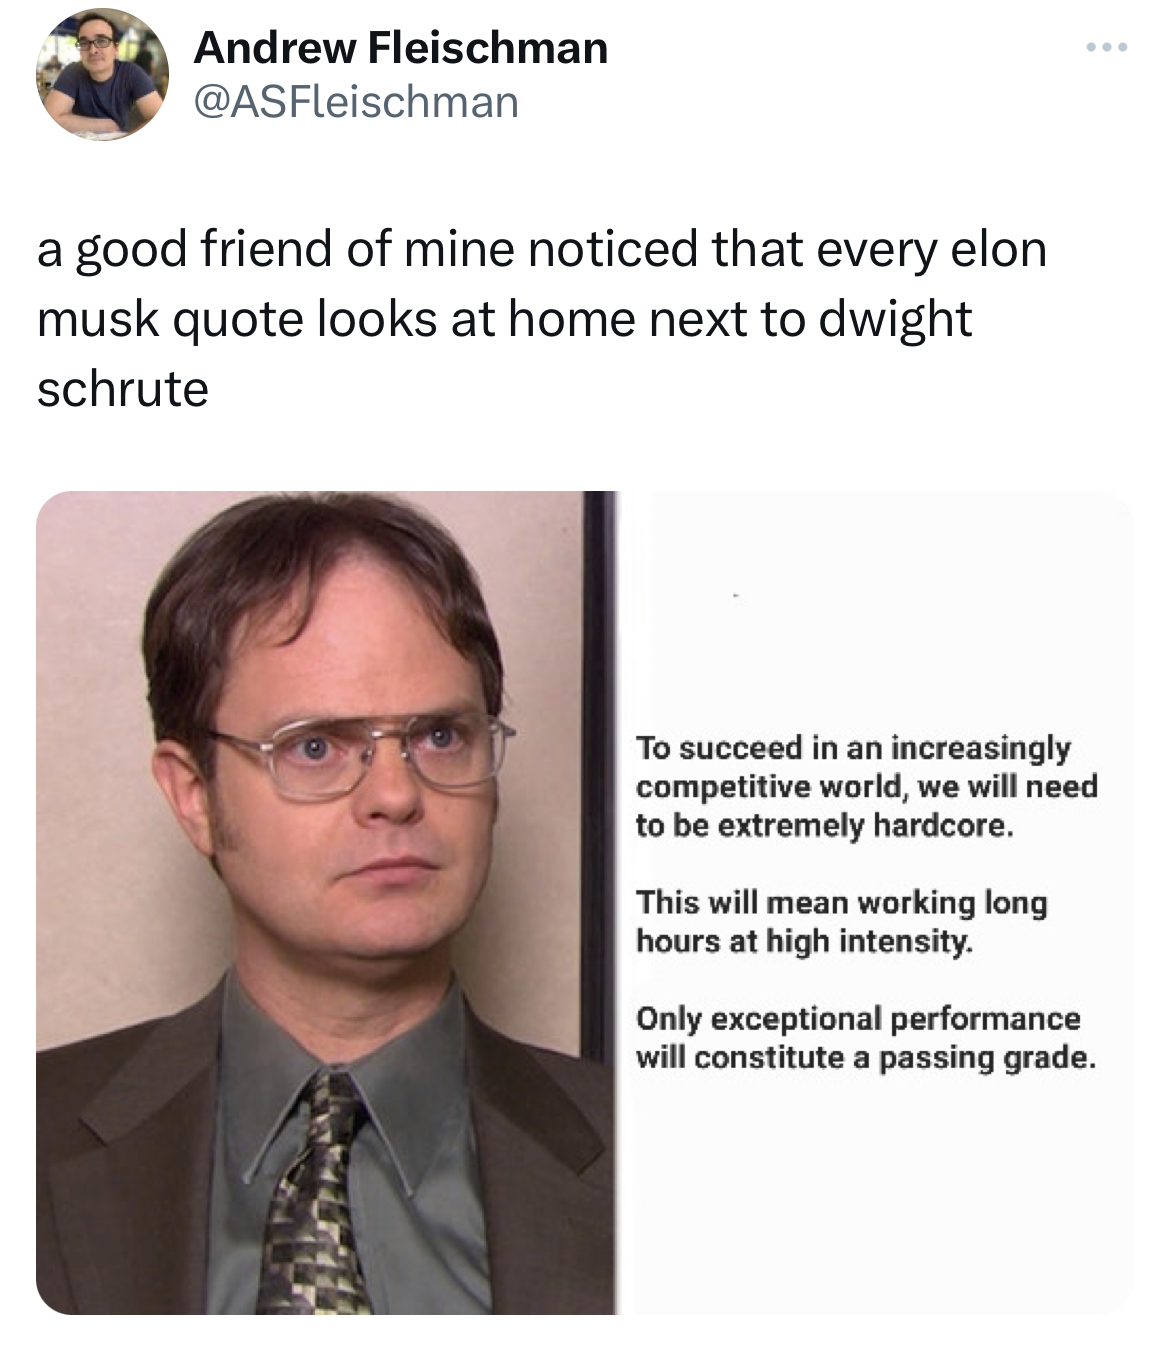 savage tweets - dwight schrute - Andrew Fleischman a good friend of mine noticed that every elon musk quote looks at home next to dwight schrute To succeed in an increasingly competitive world, we will need to be extremely hardcore. This will mean working